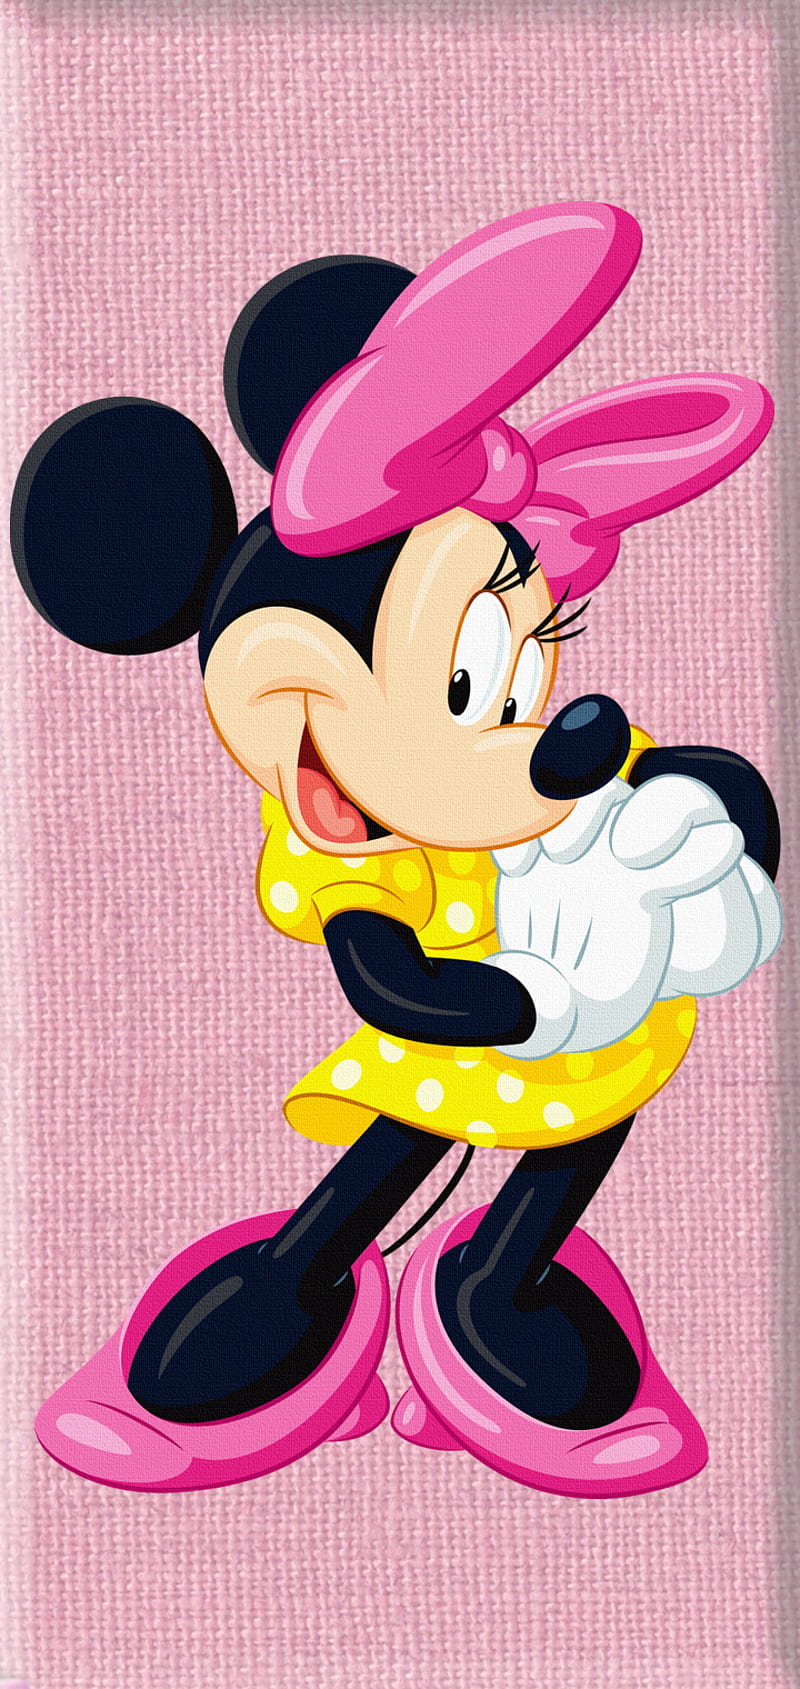 Minnie Mouse anime style by KittyAngel23 on DeviantArt